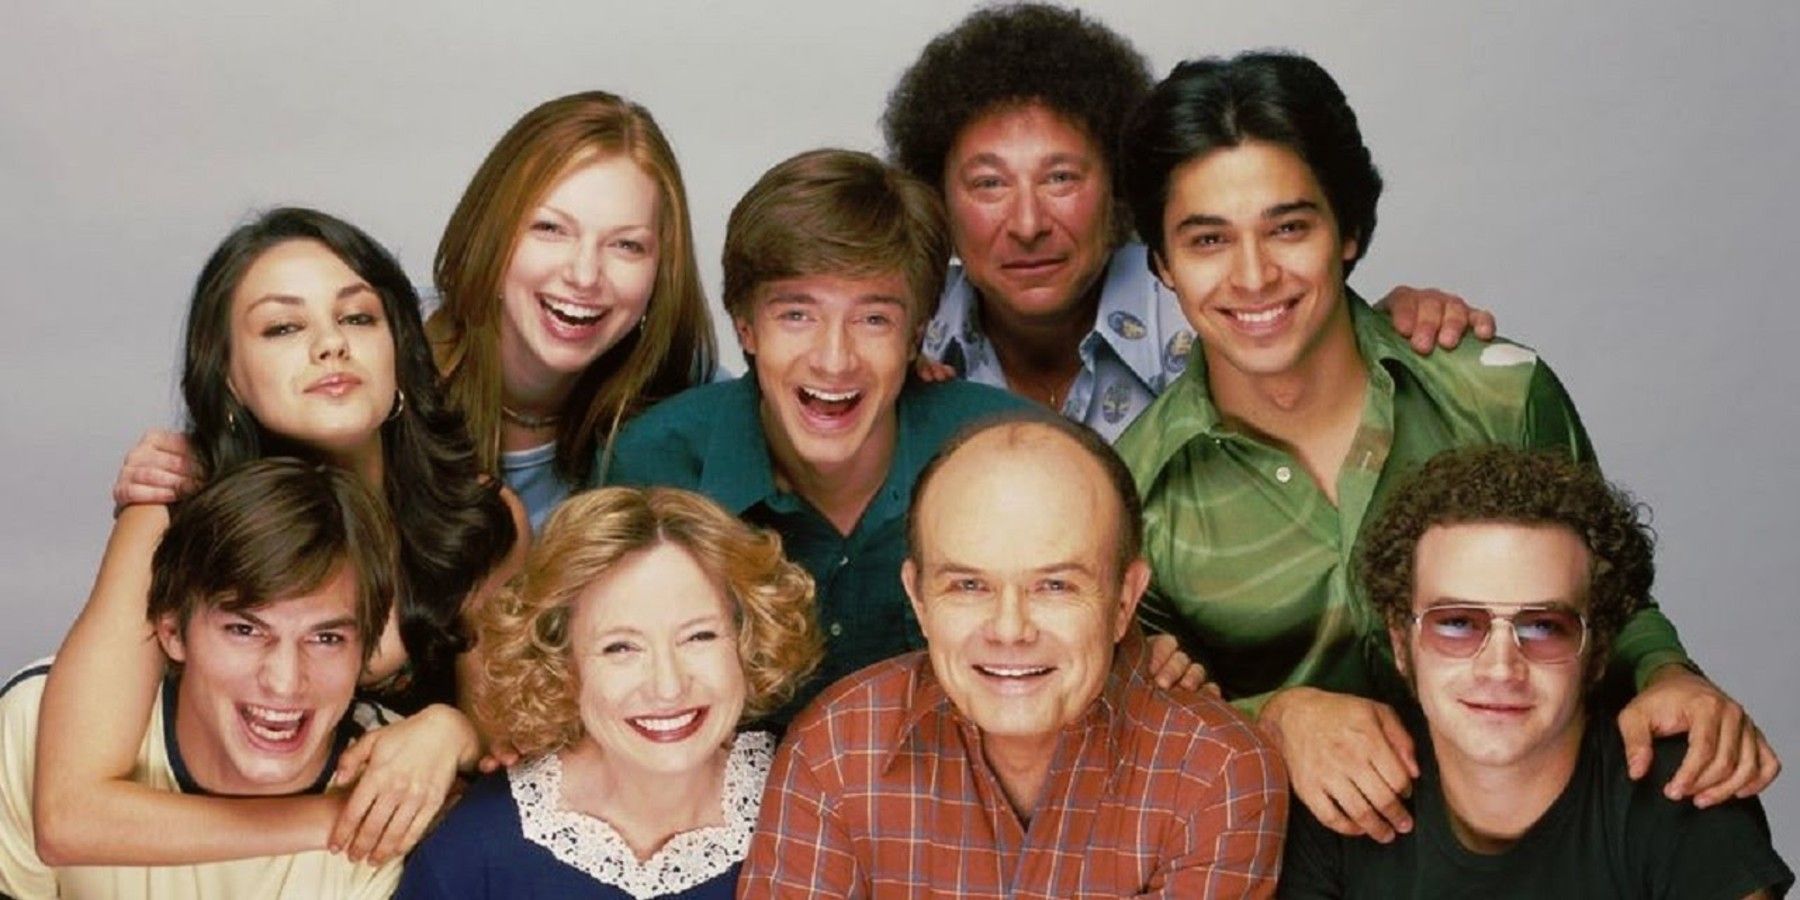 The cast of That 70s Show pose for a promotional image